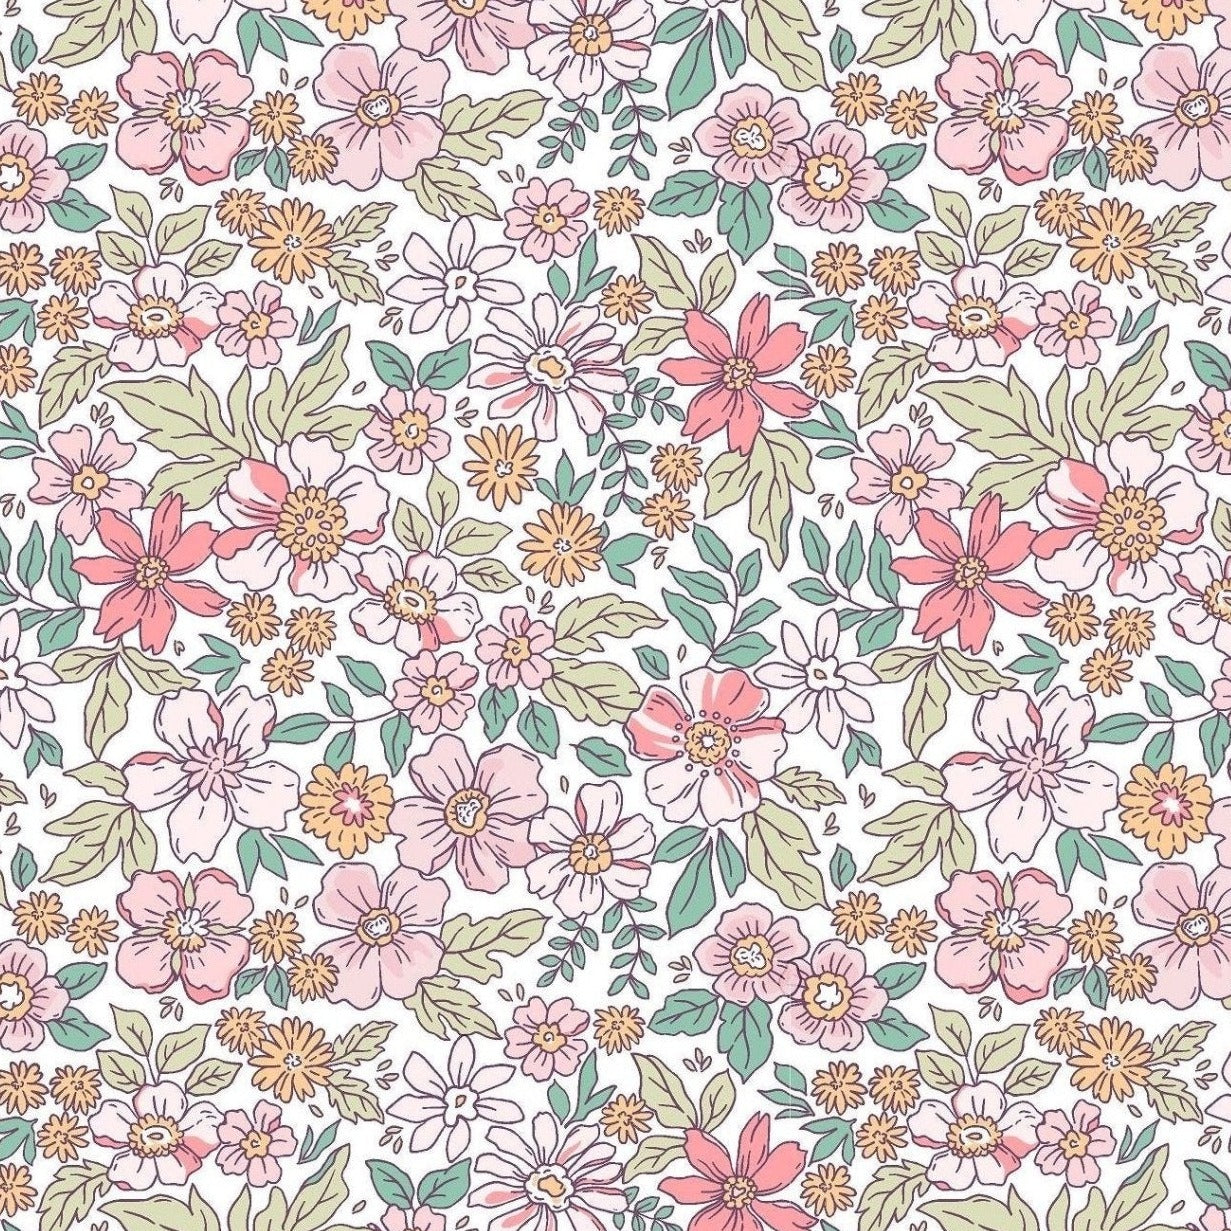 Sample of floral pink peel and stick wallpaper removable, flowery wallpaper, wallpaper nursery